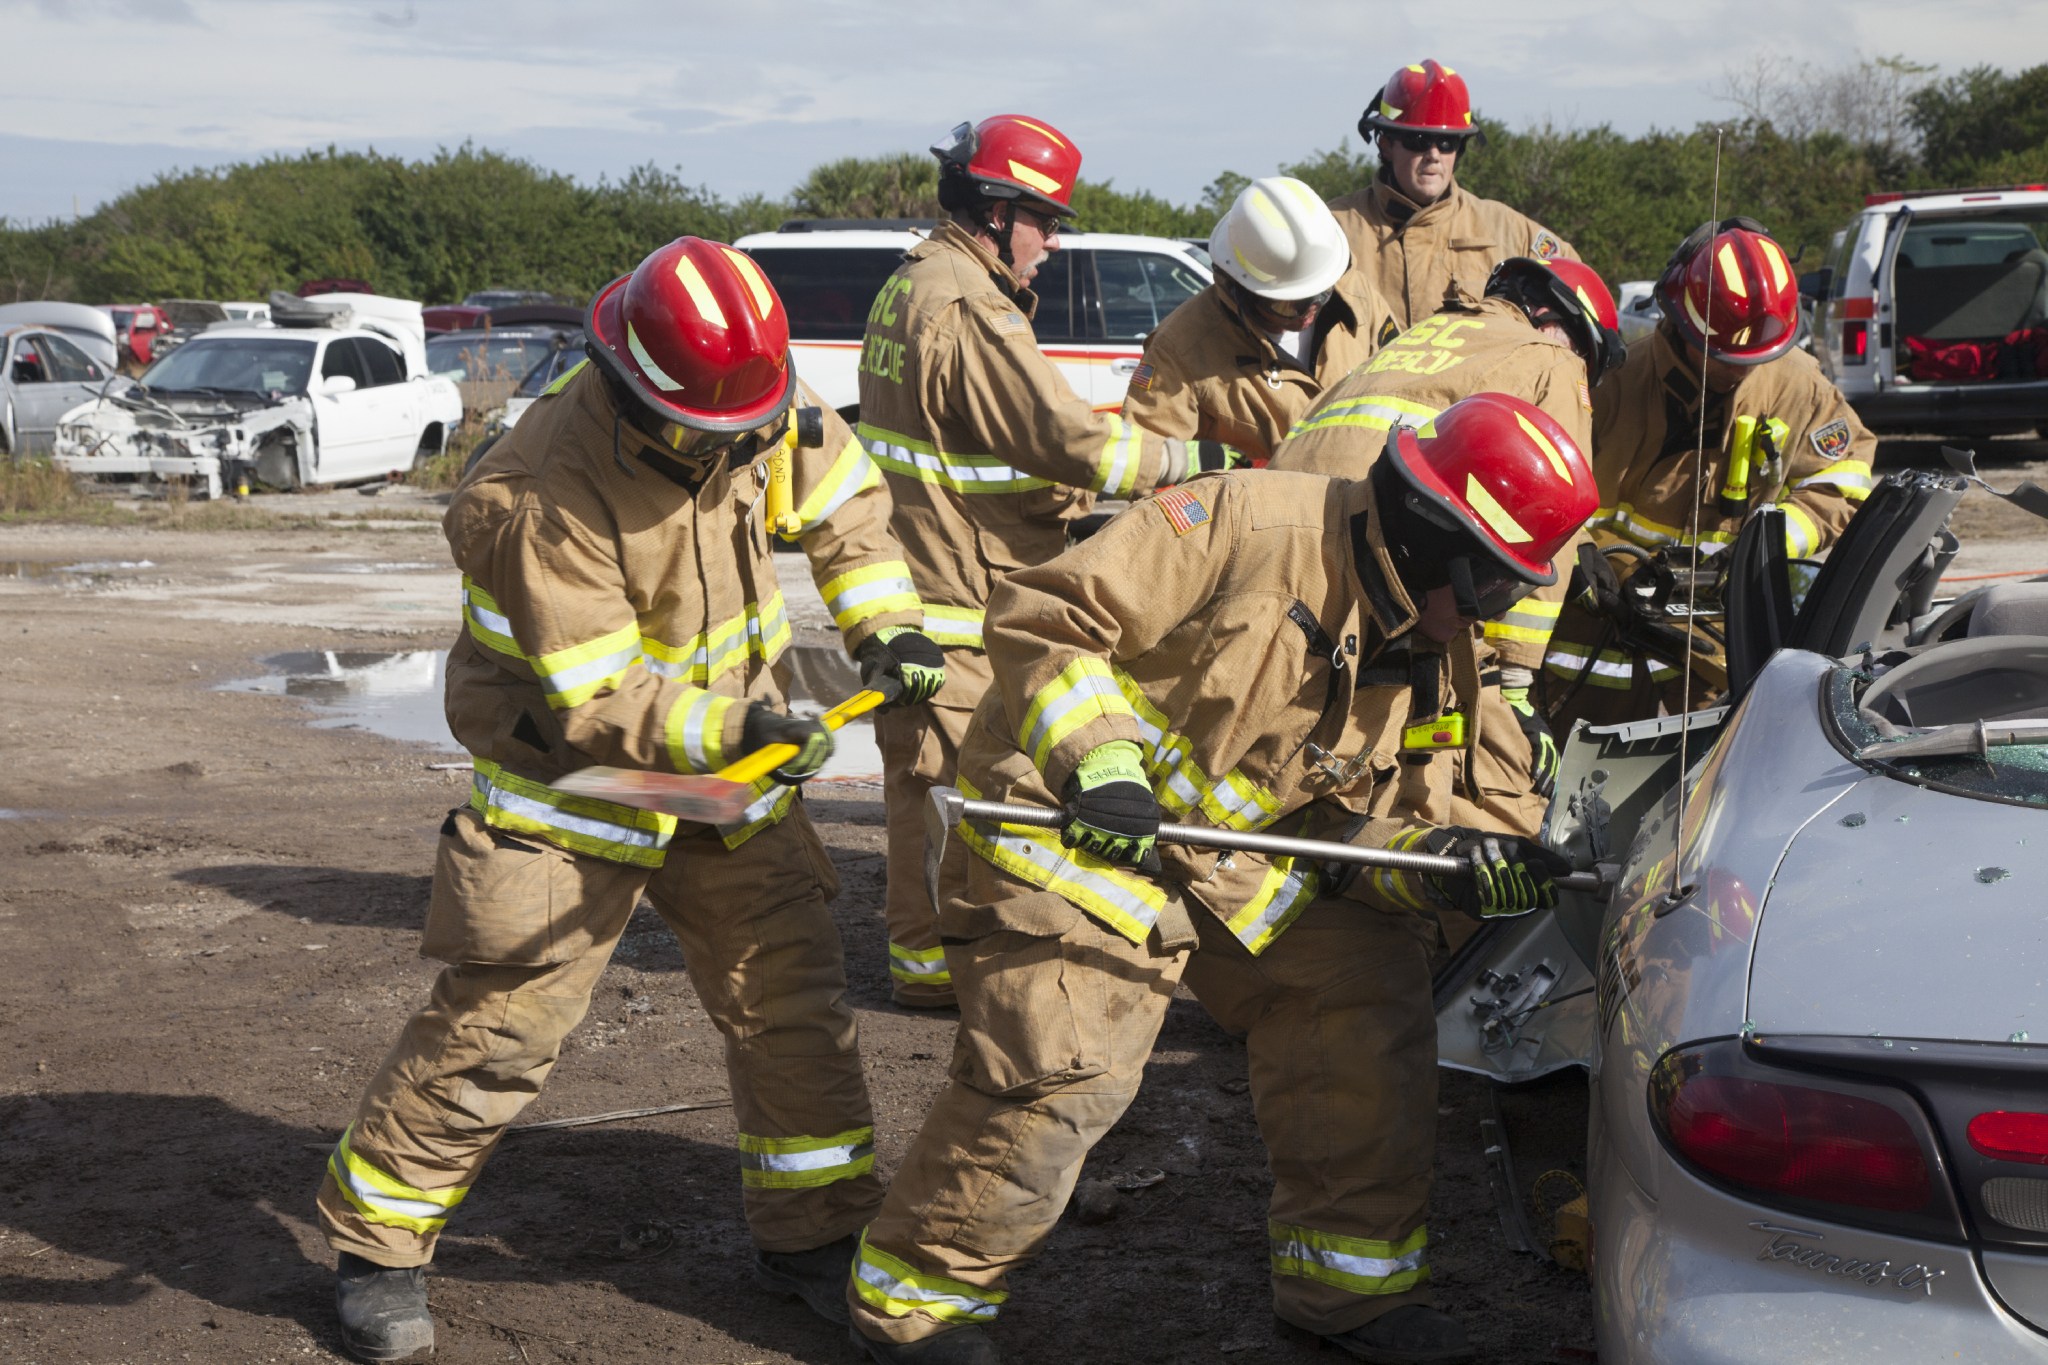 Special Rescue Operations firefighters with NASA Fire Rescue Services in the Protective Services Office at Kennedy Space Center in Florida practice vehicle extrication training at an auto salvage yard near the center. A firefighter with an axe assists as another firefighter uses a special tool to punch through the door of the vehicle.